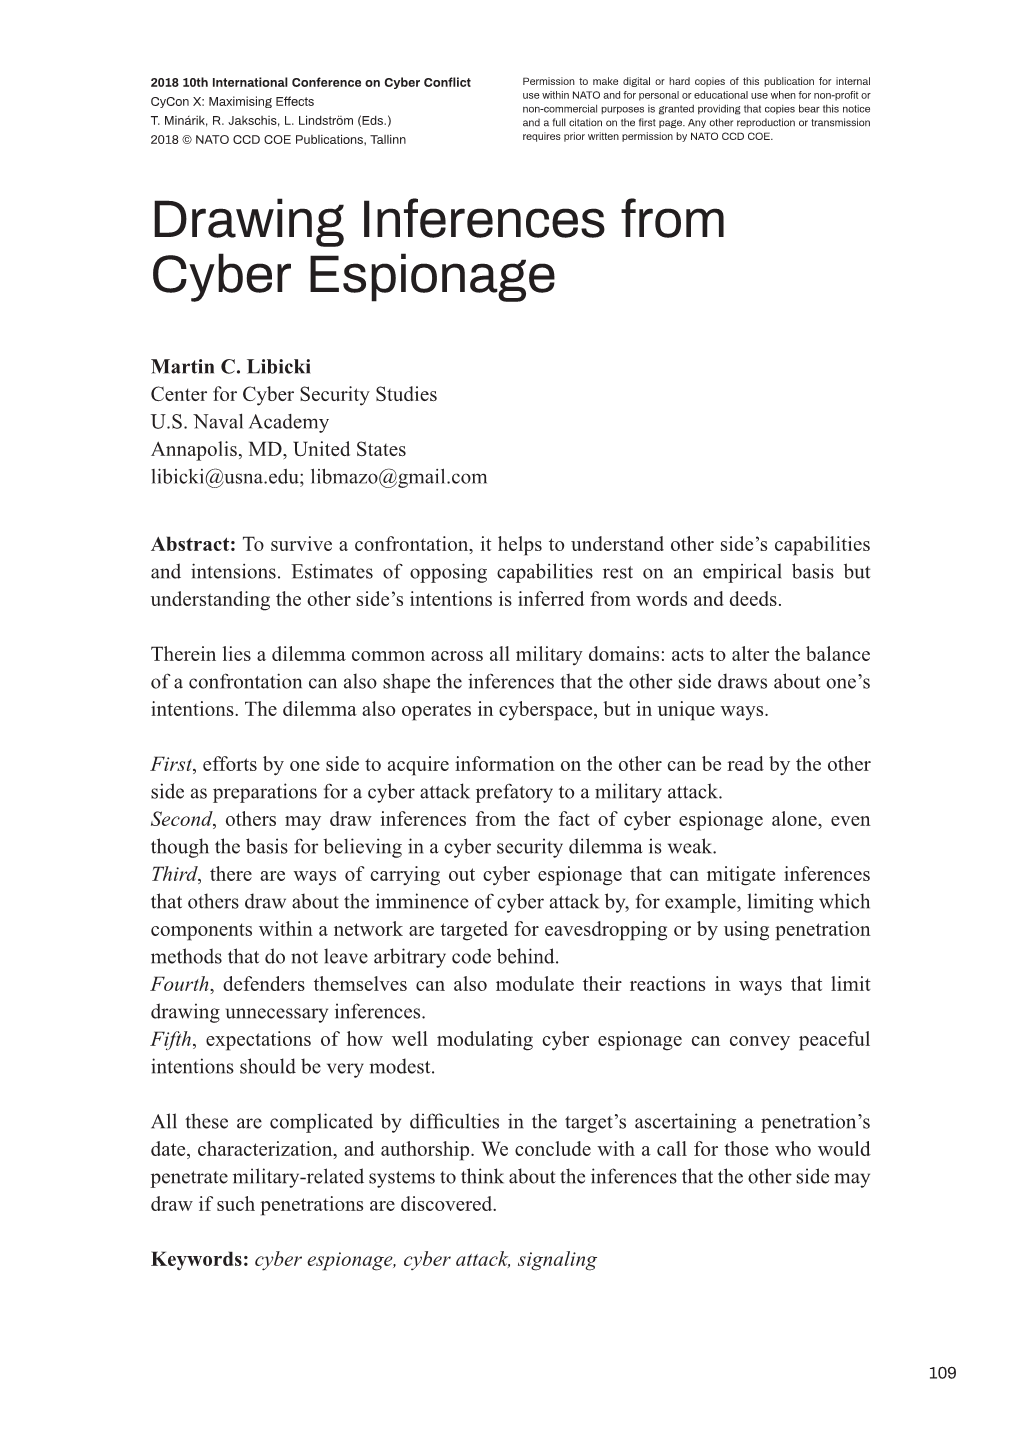 Drawing Inferences from Cyber Espionage